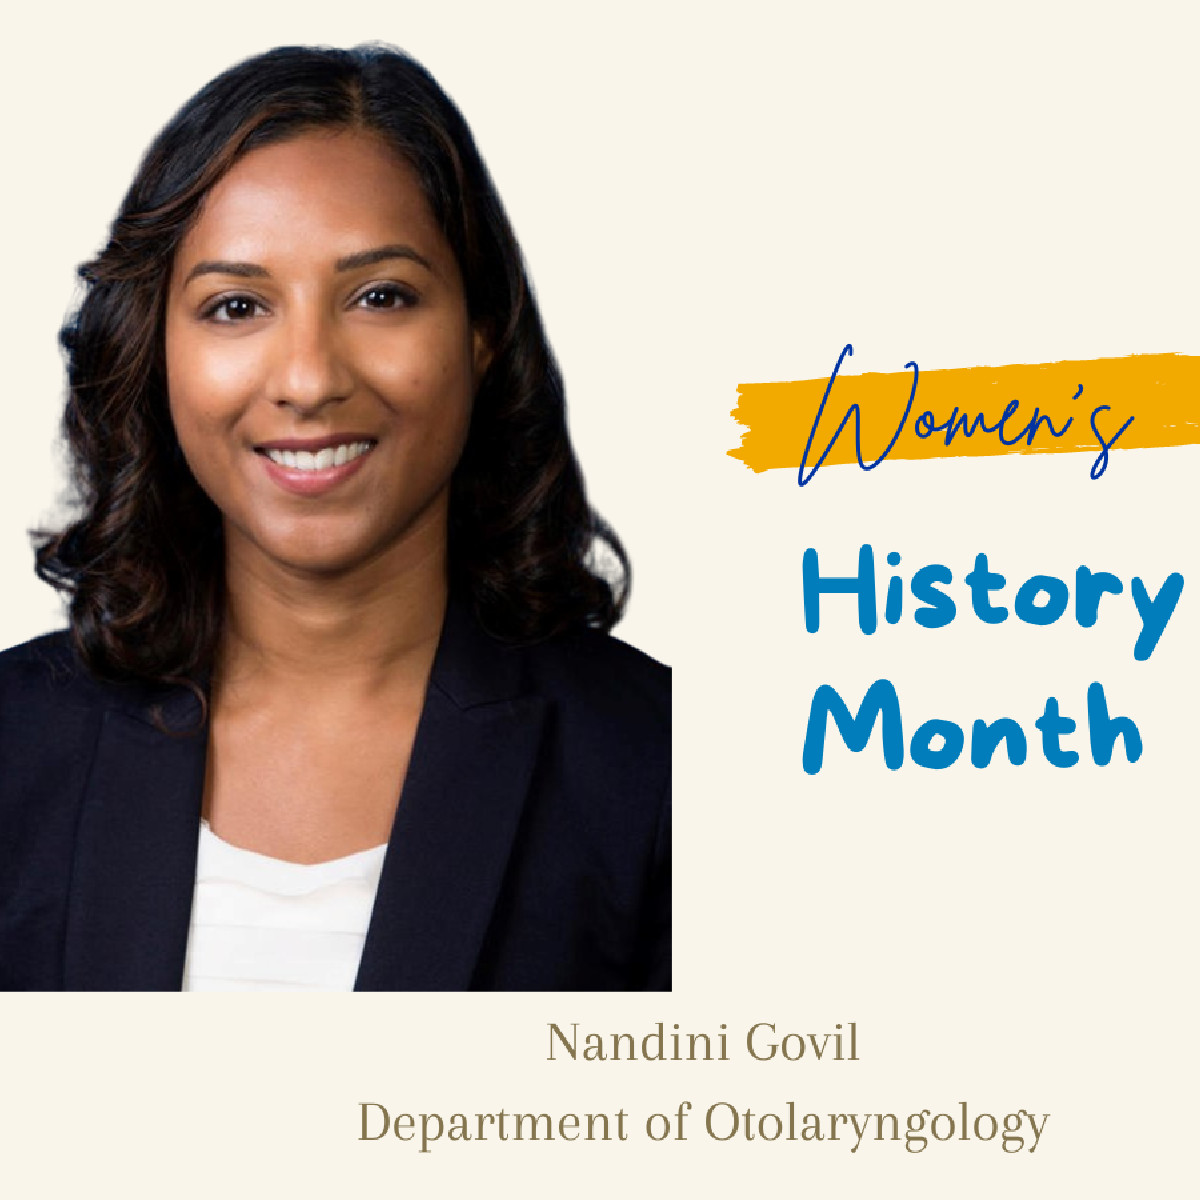 Today we recognize Dr. Nandini Govil as part of #WomensHistoryMonth. Dr. Govil is an assistant professor in the Department of Otolaryngology, & she shared a powerful story about her mother who serves as her inspiration. Read her story ➡️ brnw.ch/21wI6ip